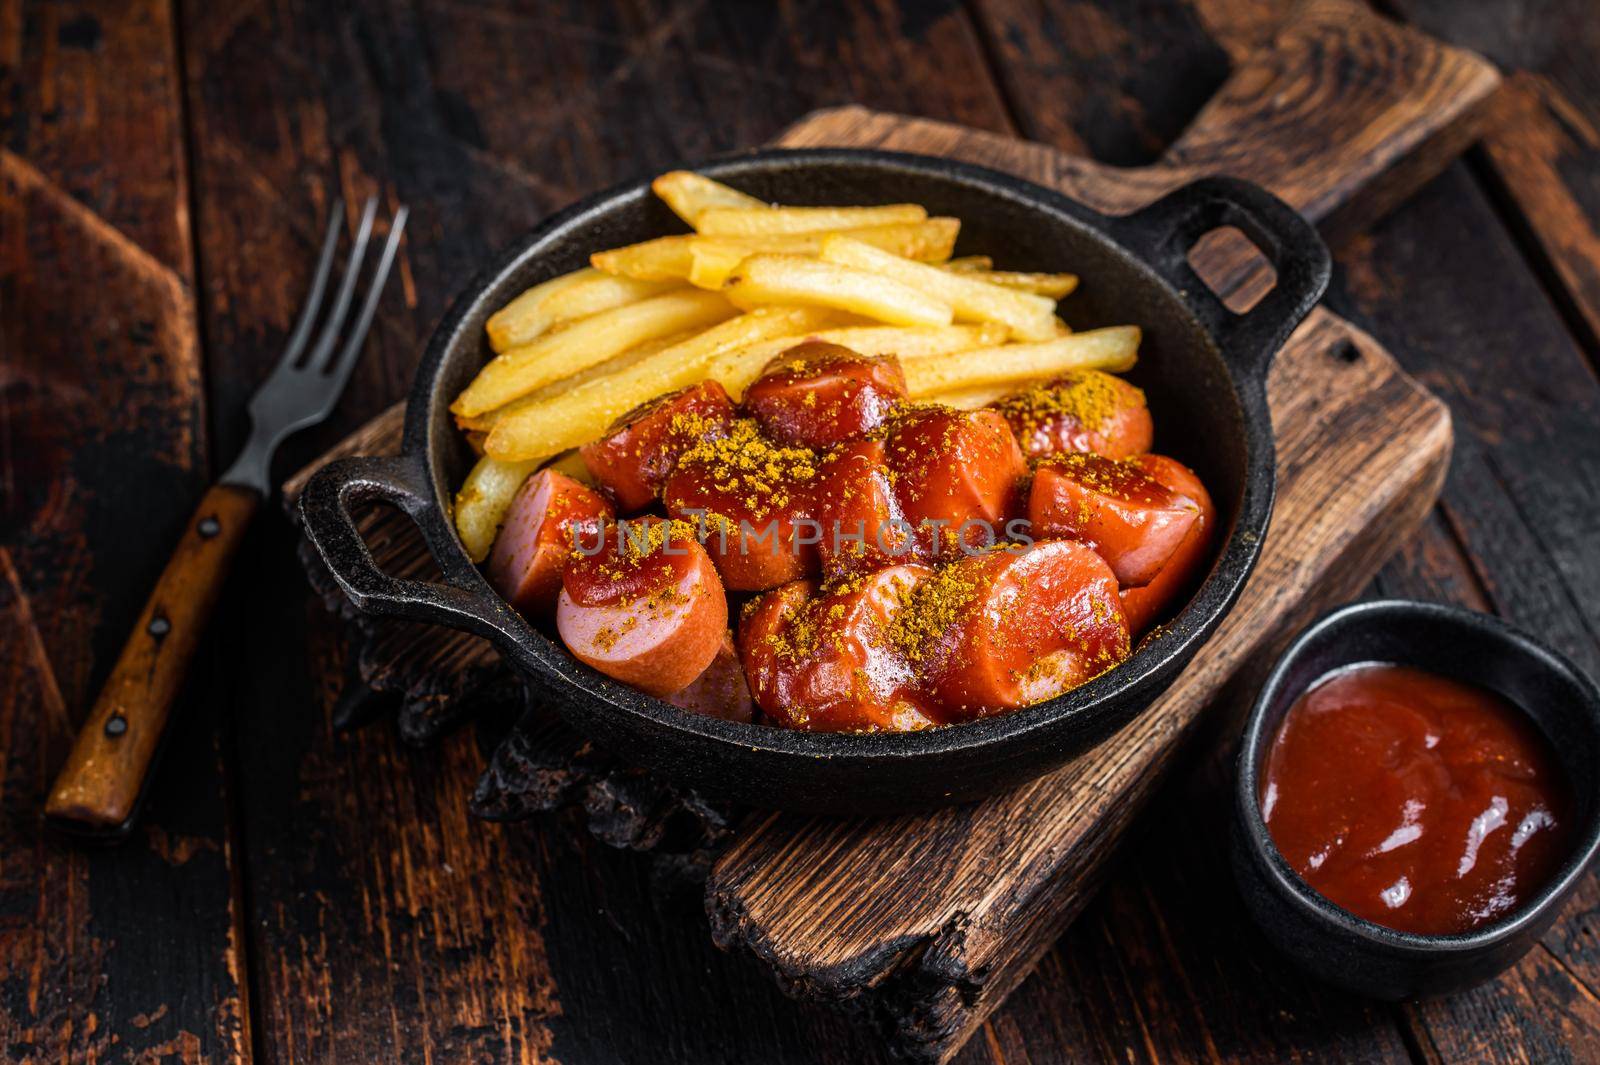 Currywurst street food meal, Curry spice on wursts served French fries in a pan. Dark wooden background. Top view.